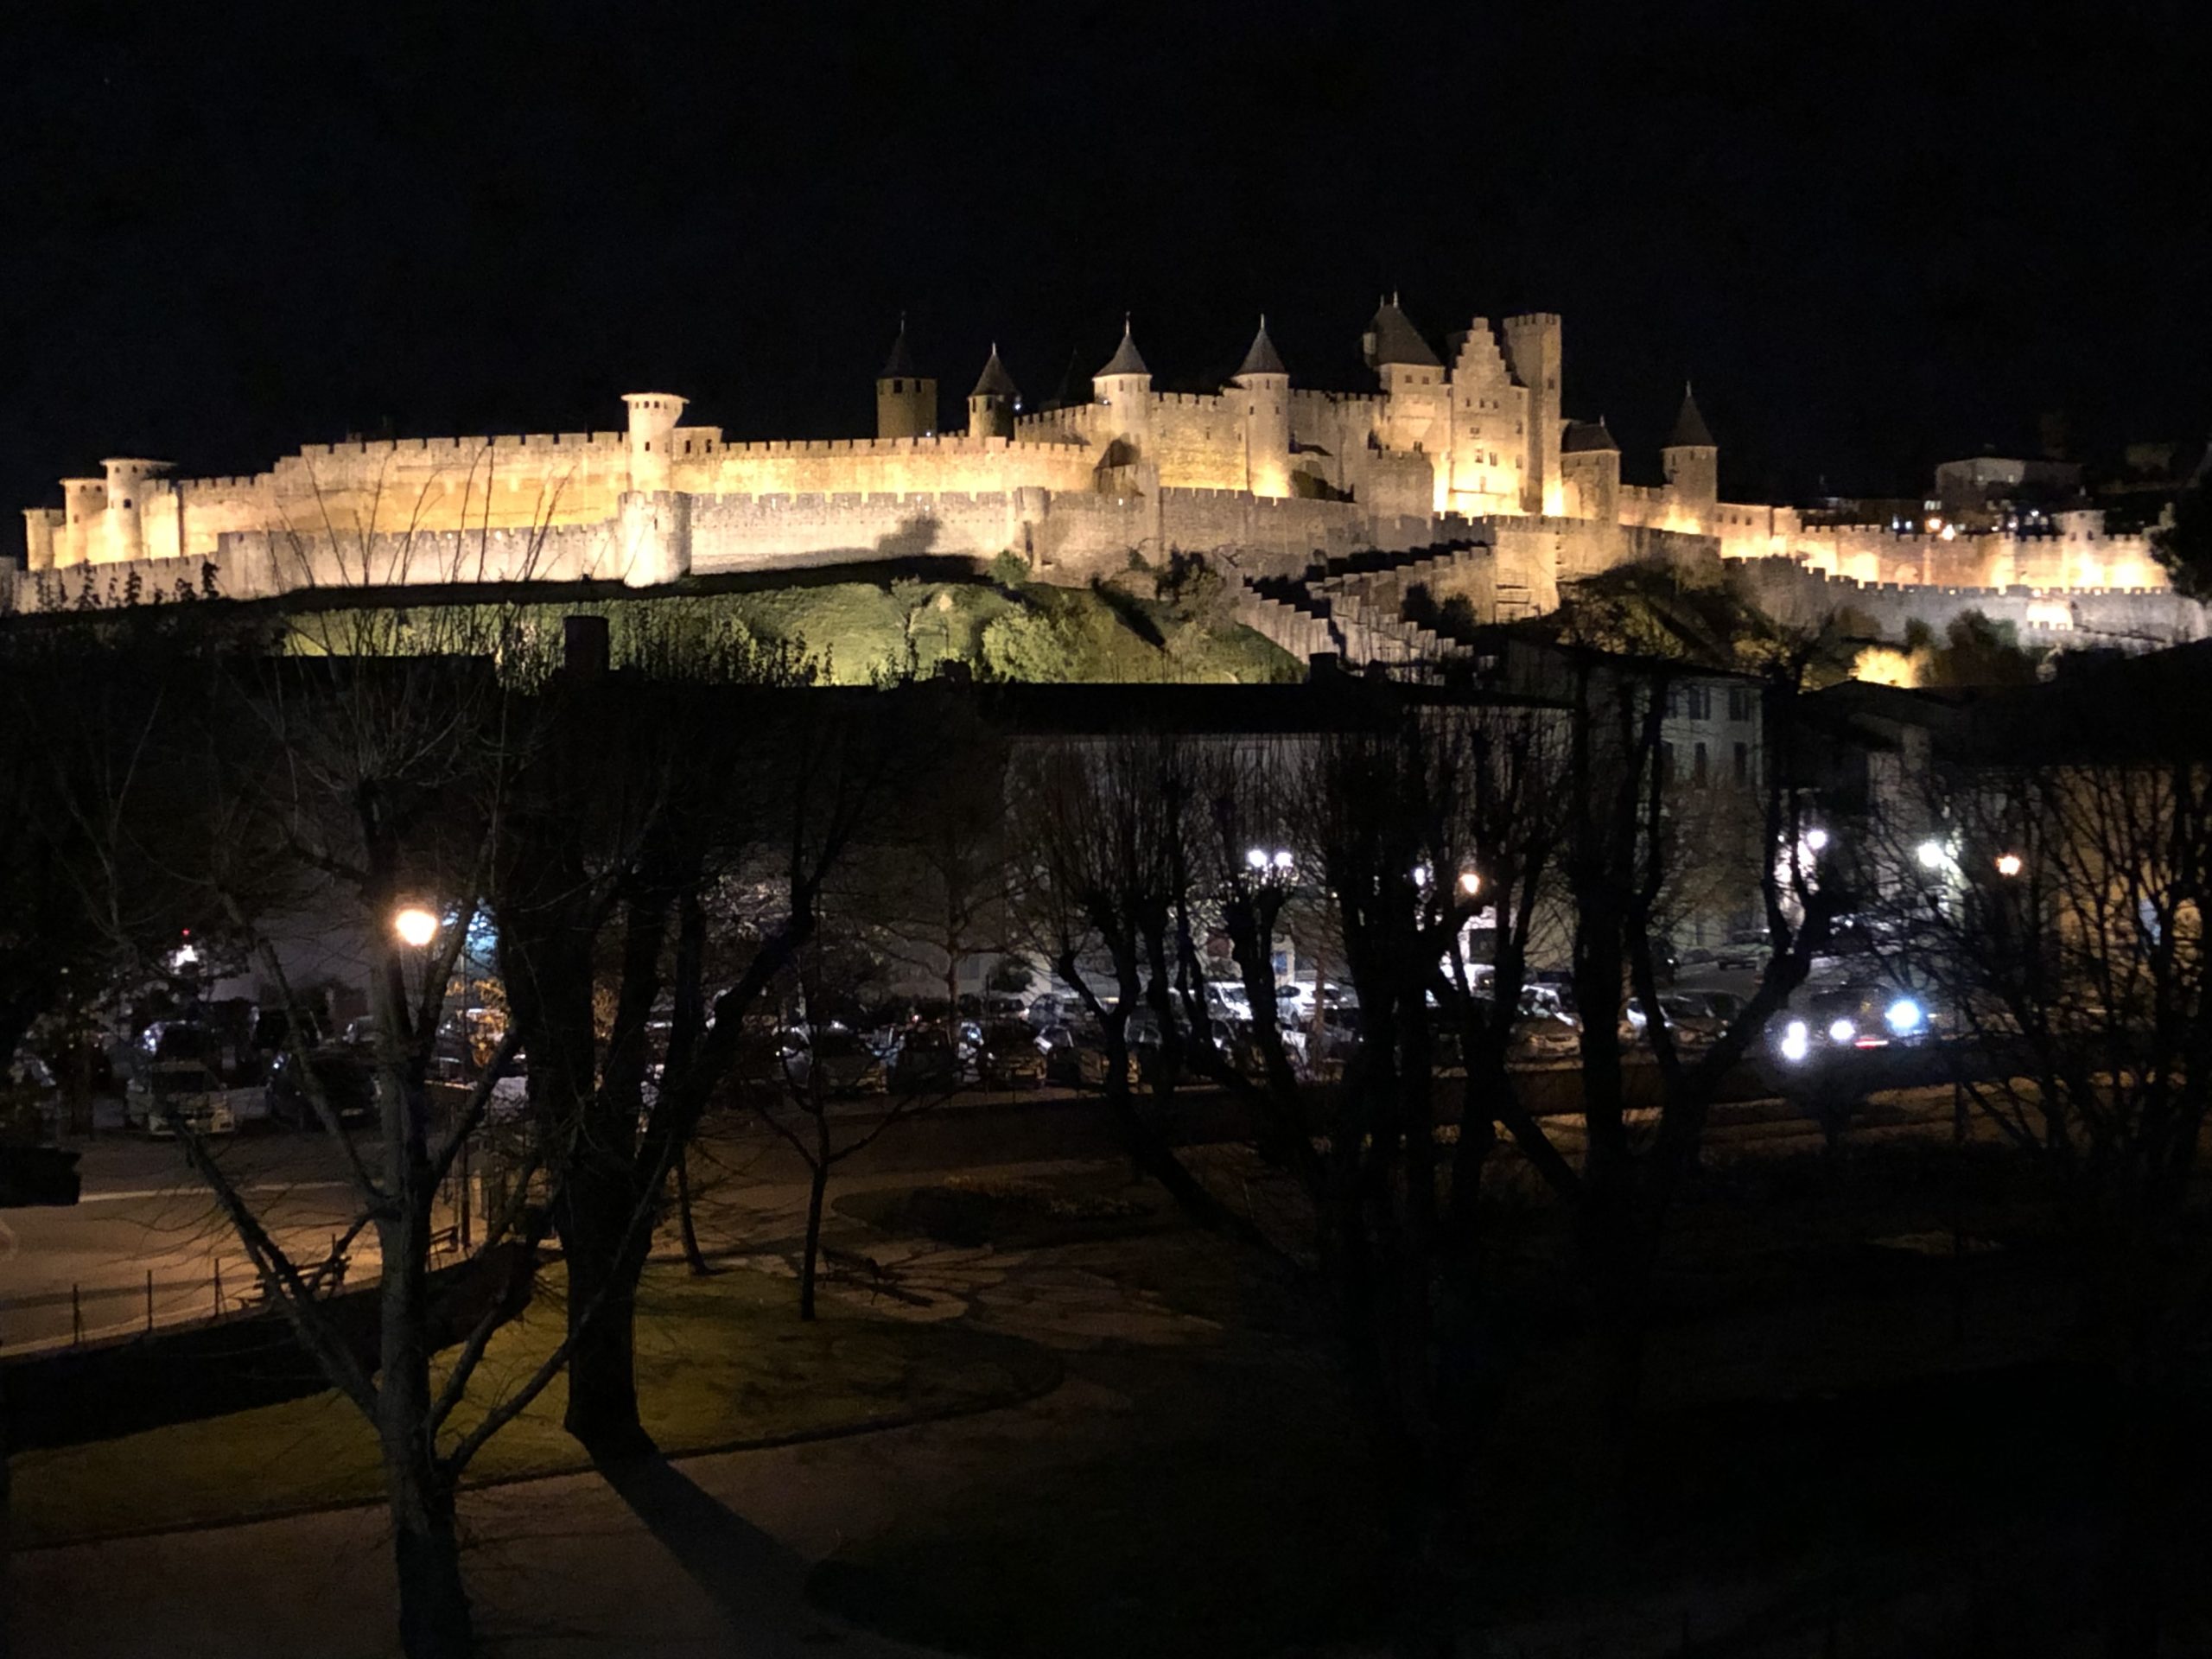 Carcassonne medieval walled city night view from Pont Vieux